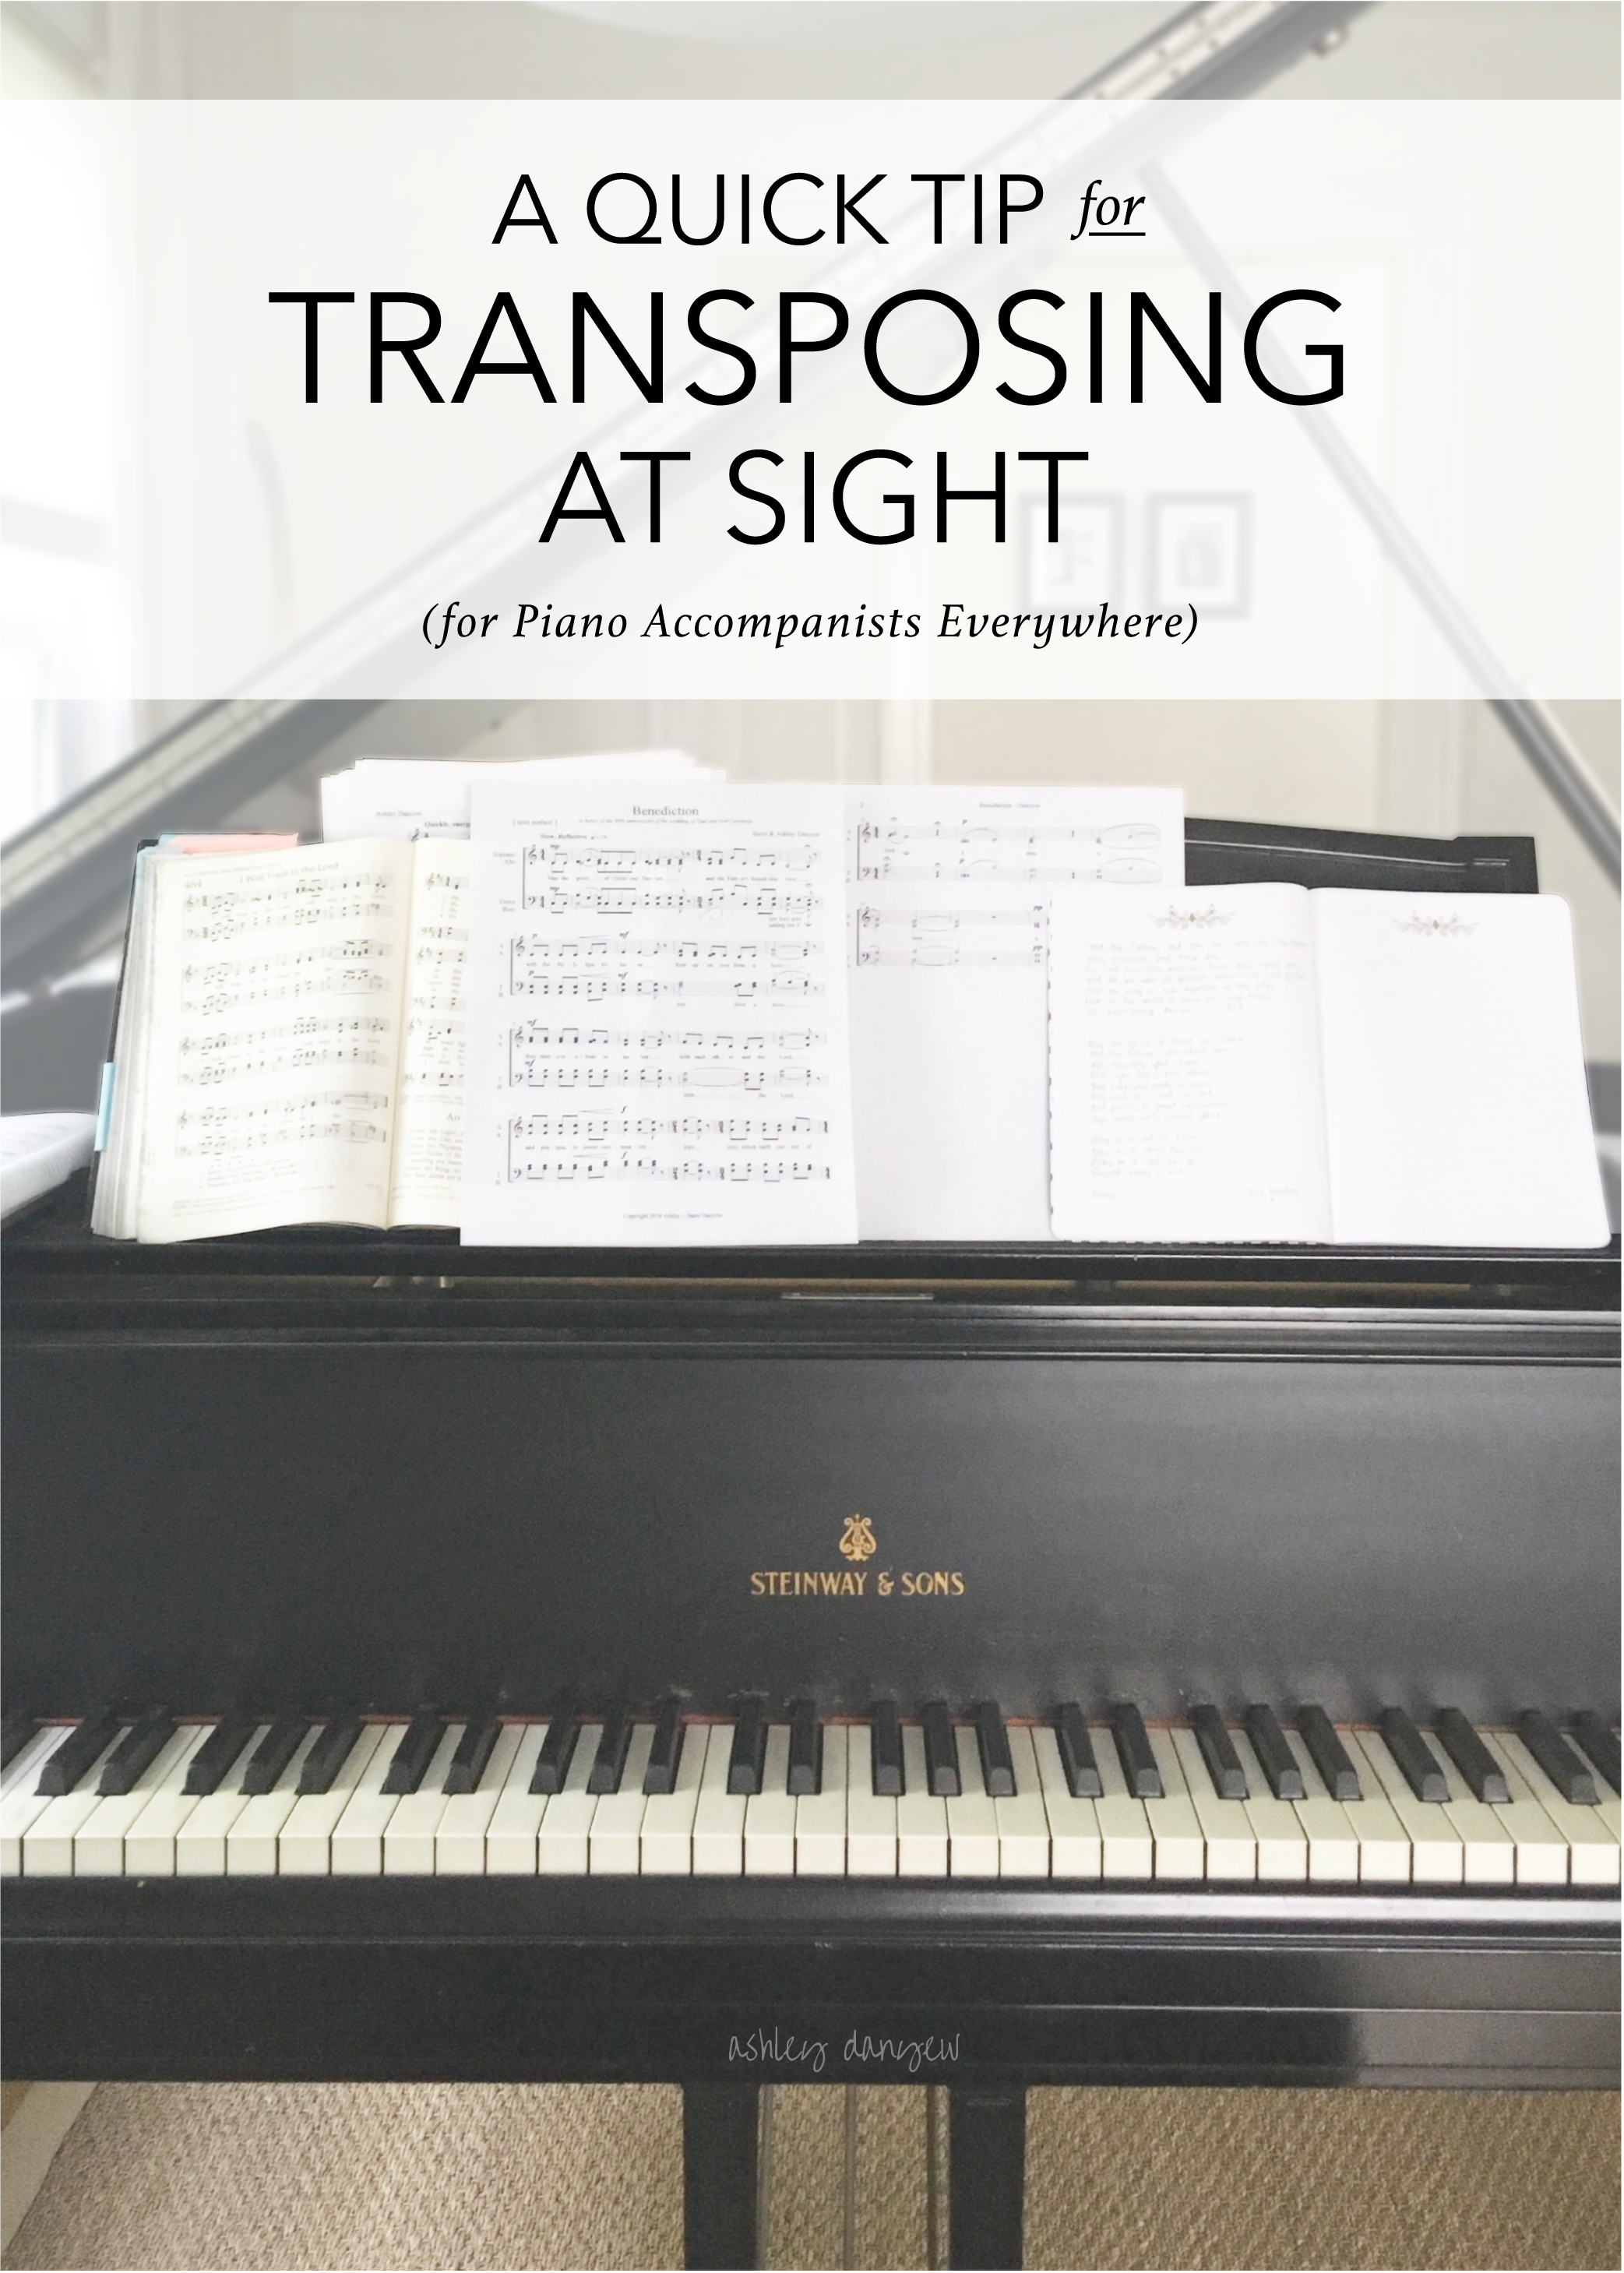 A Quick Tip for Transposing at Sight (for Piano Accompanists Everywhere)